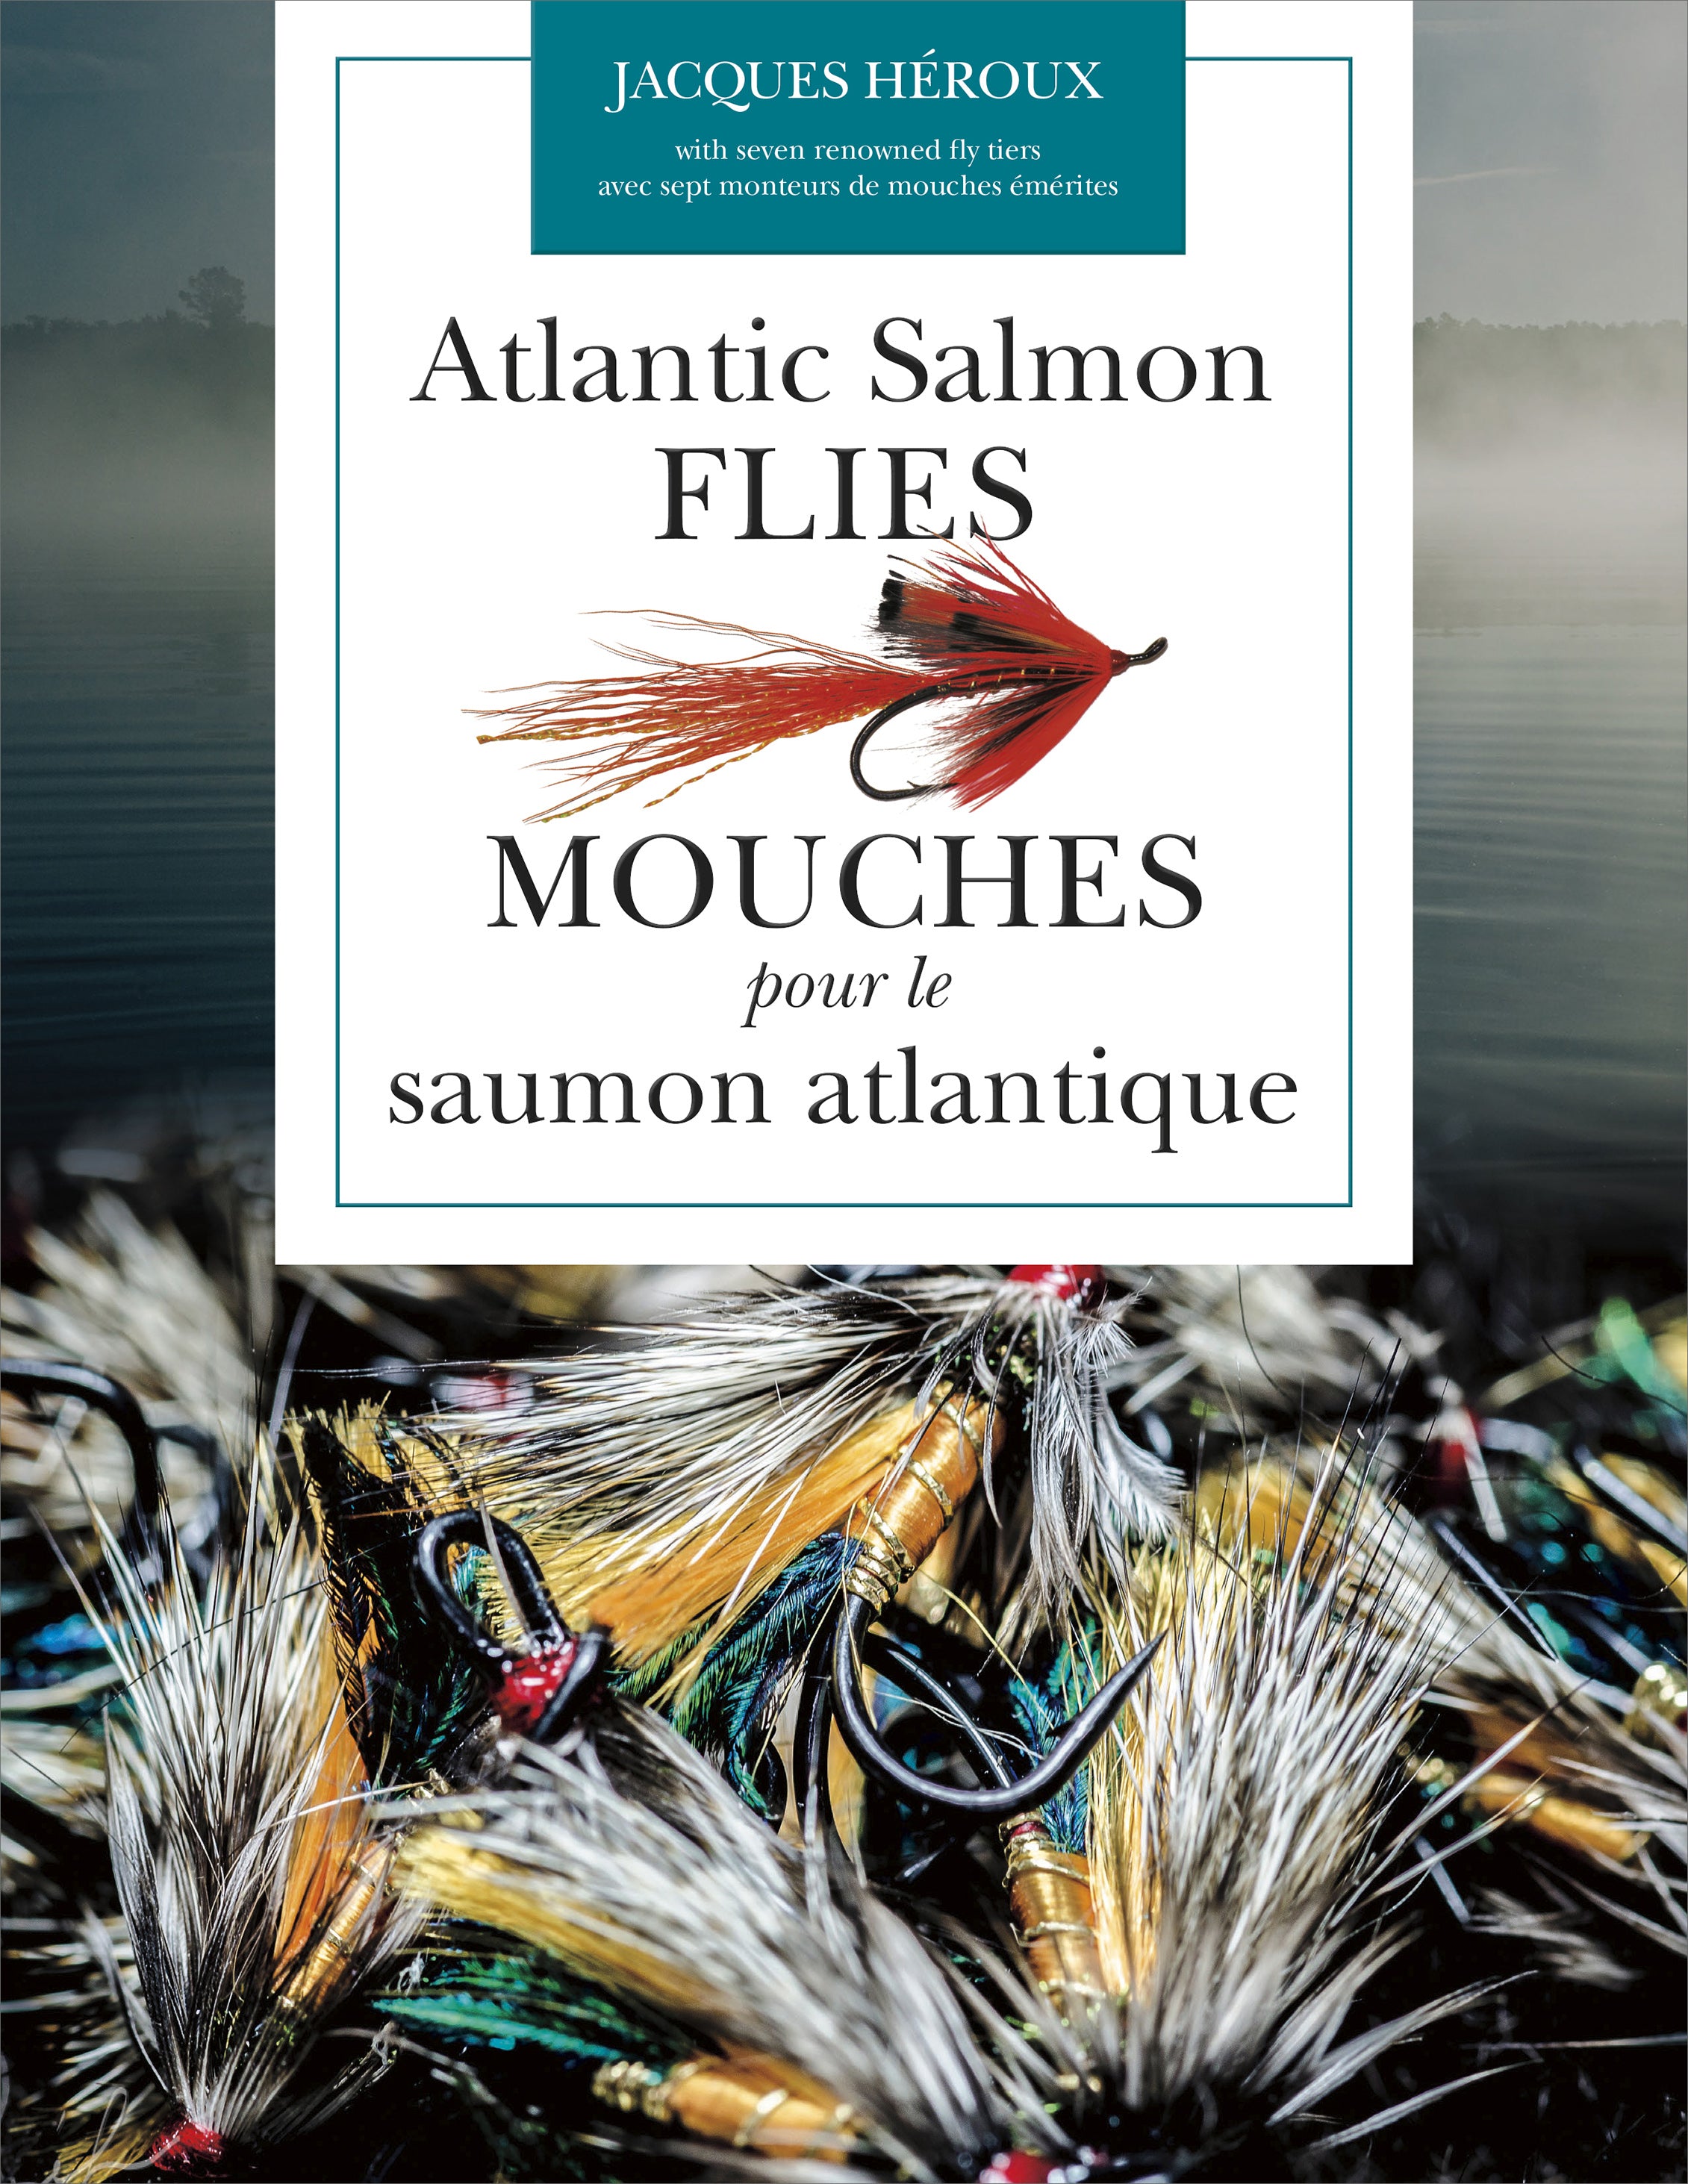 Fly Fishing For Salmon by Allan Sefton (ebook) - Apple Books